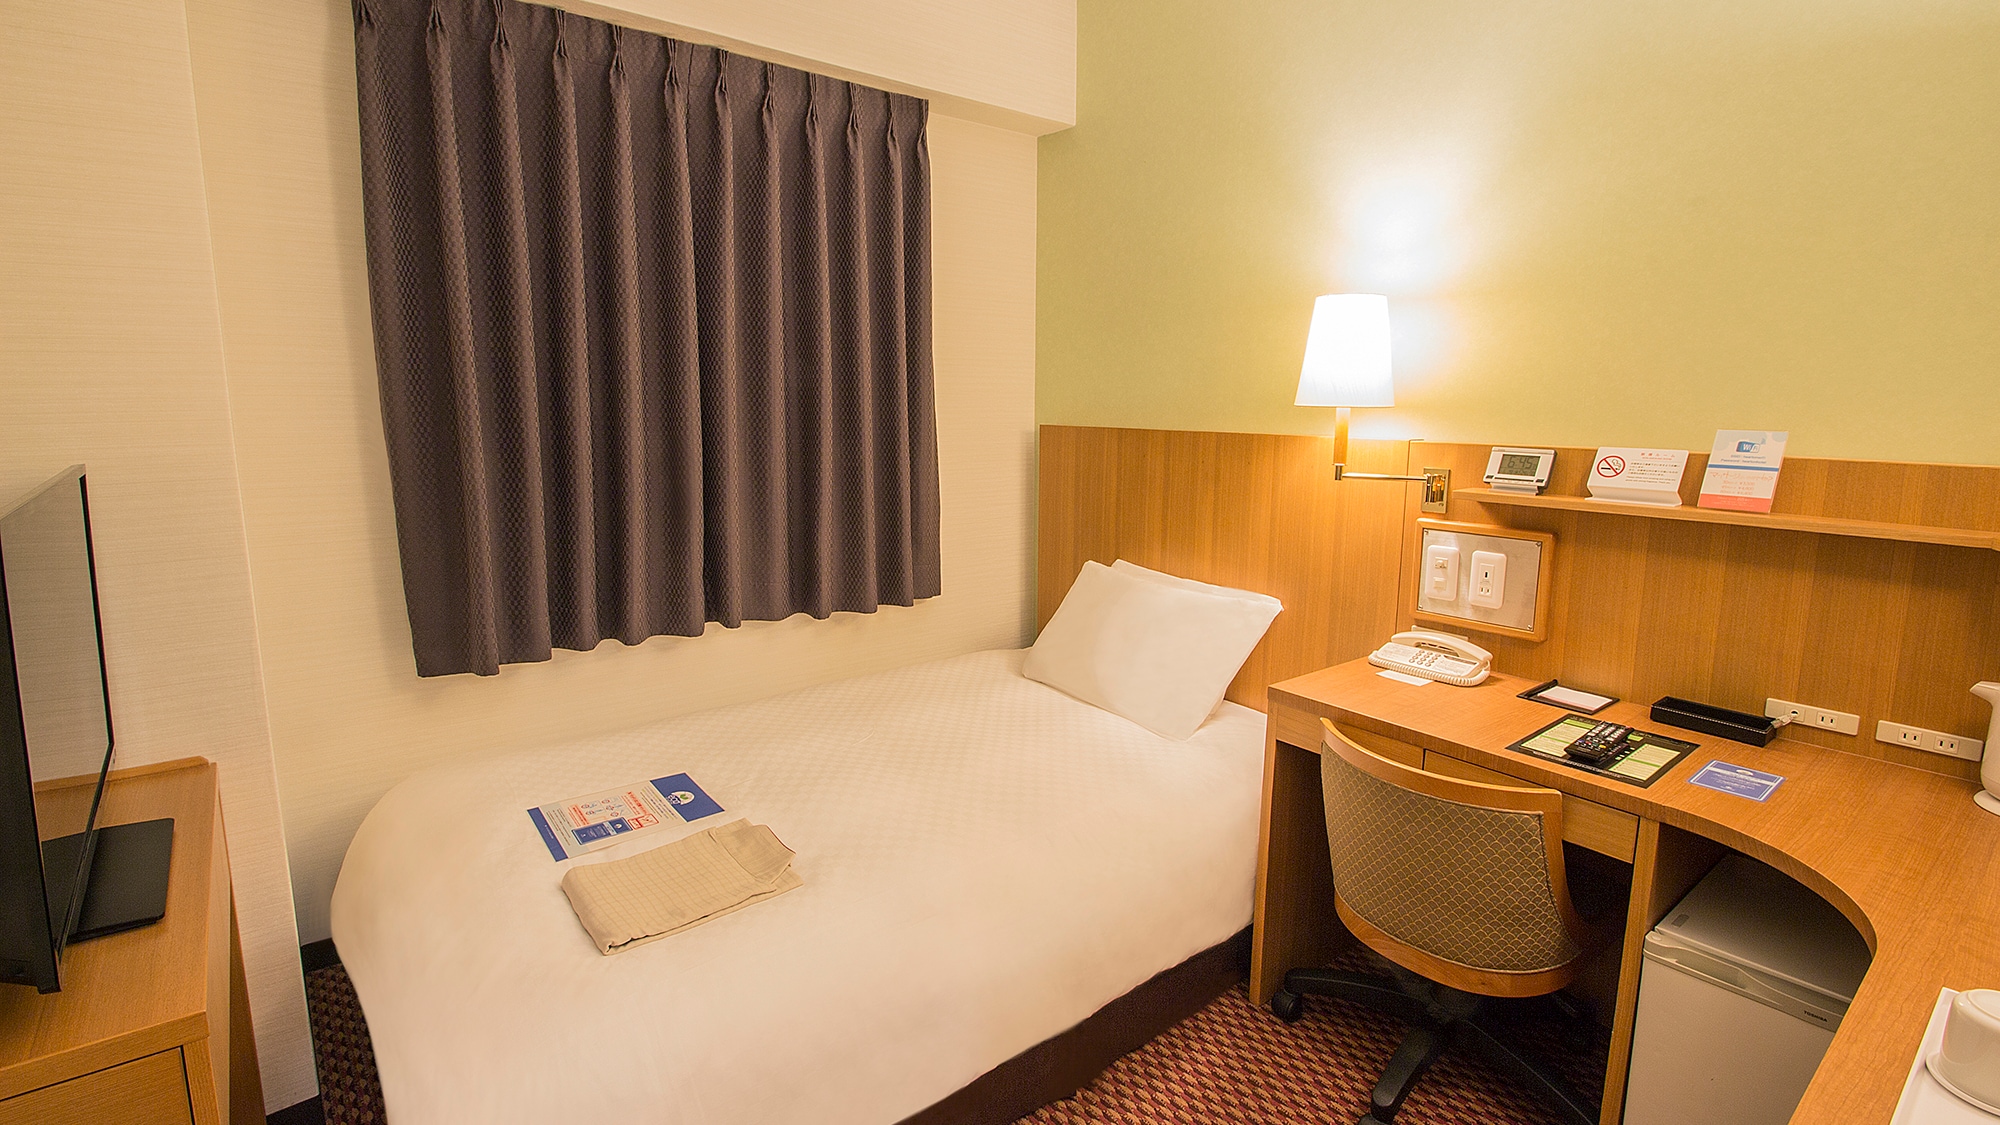 ■ Single room (main building): 12㎡ ・ 120cm & times; 195cm (made by Simmons) beds are available.